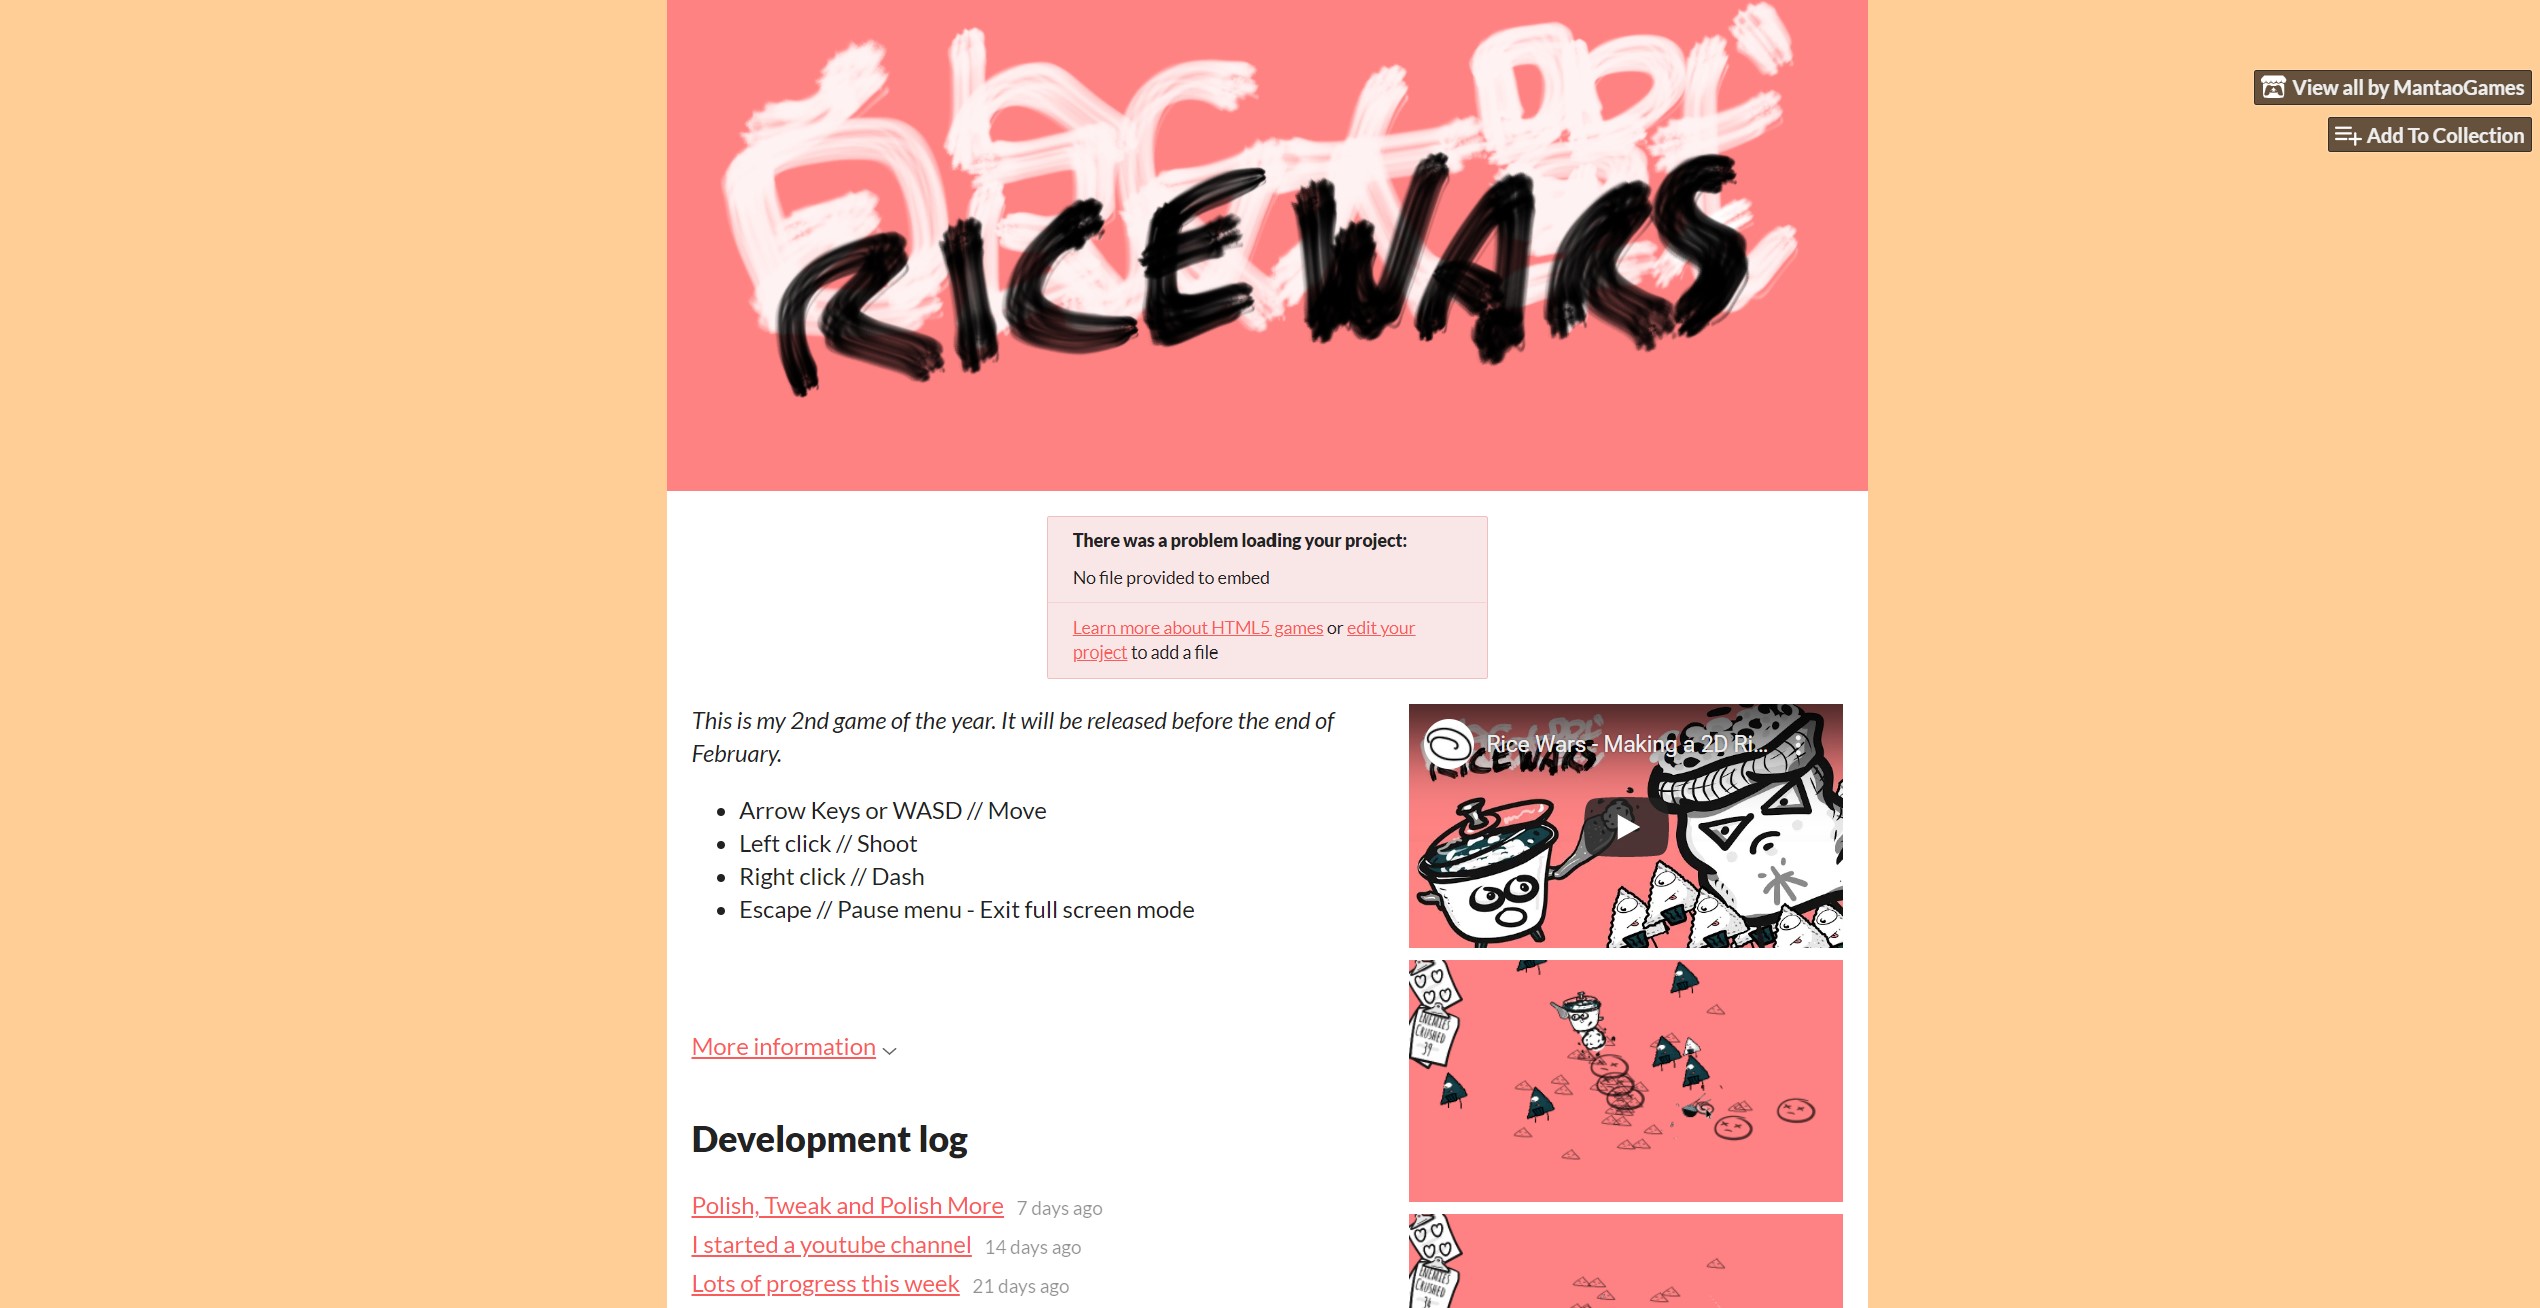 Rice Wars'page on itch.io